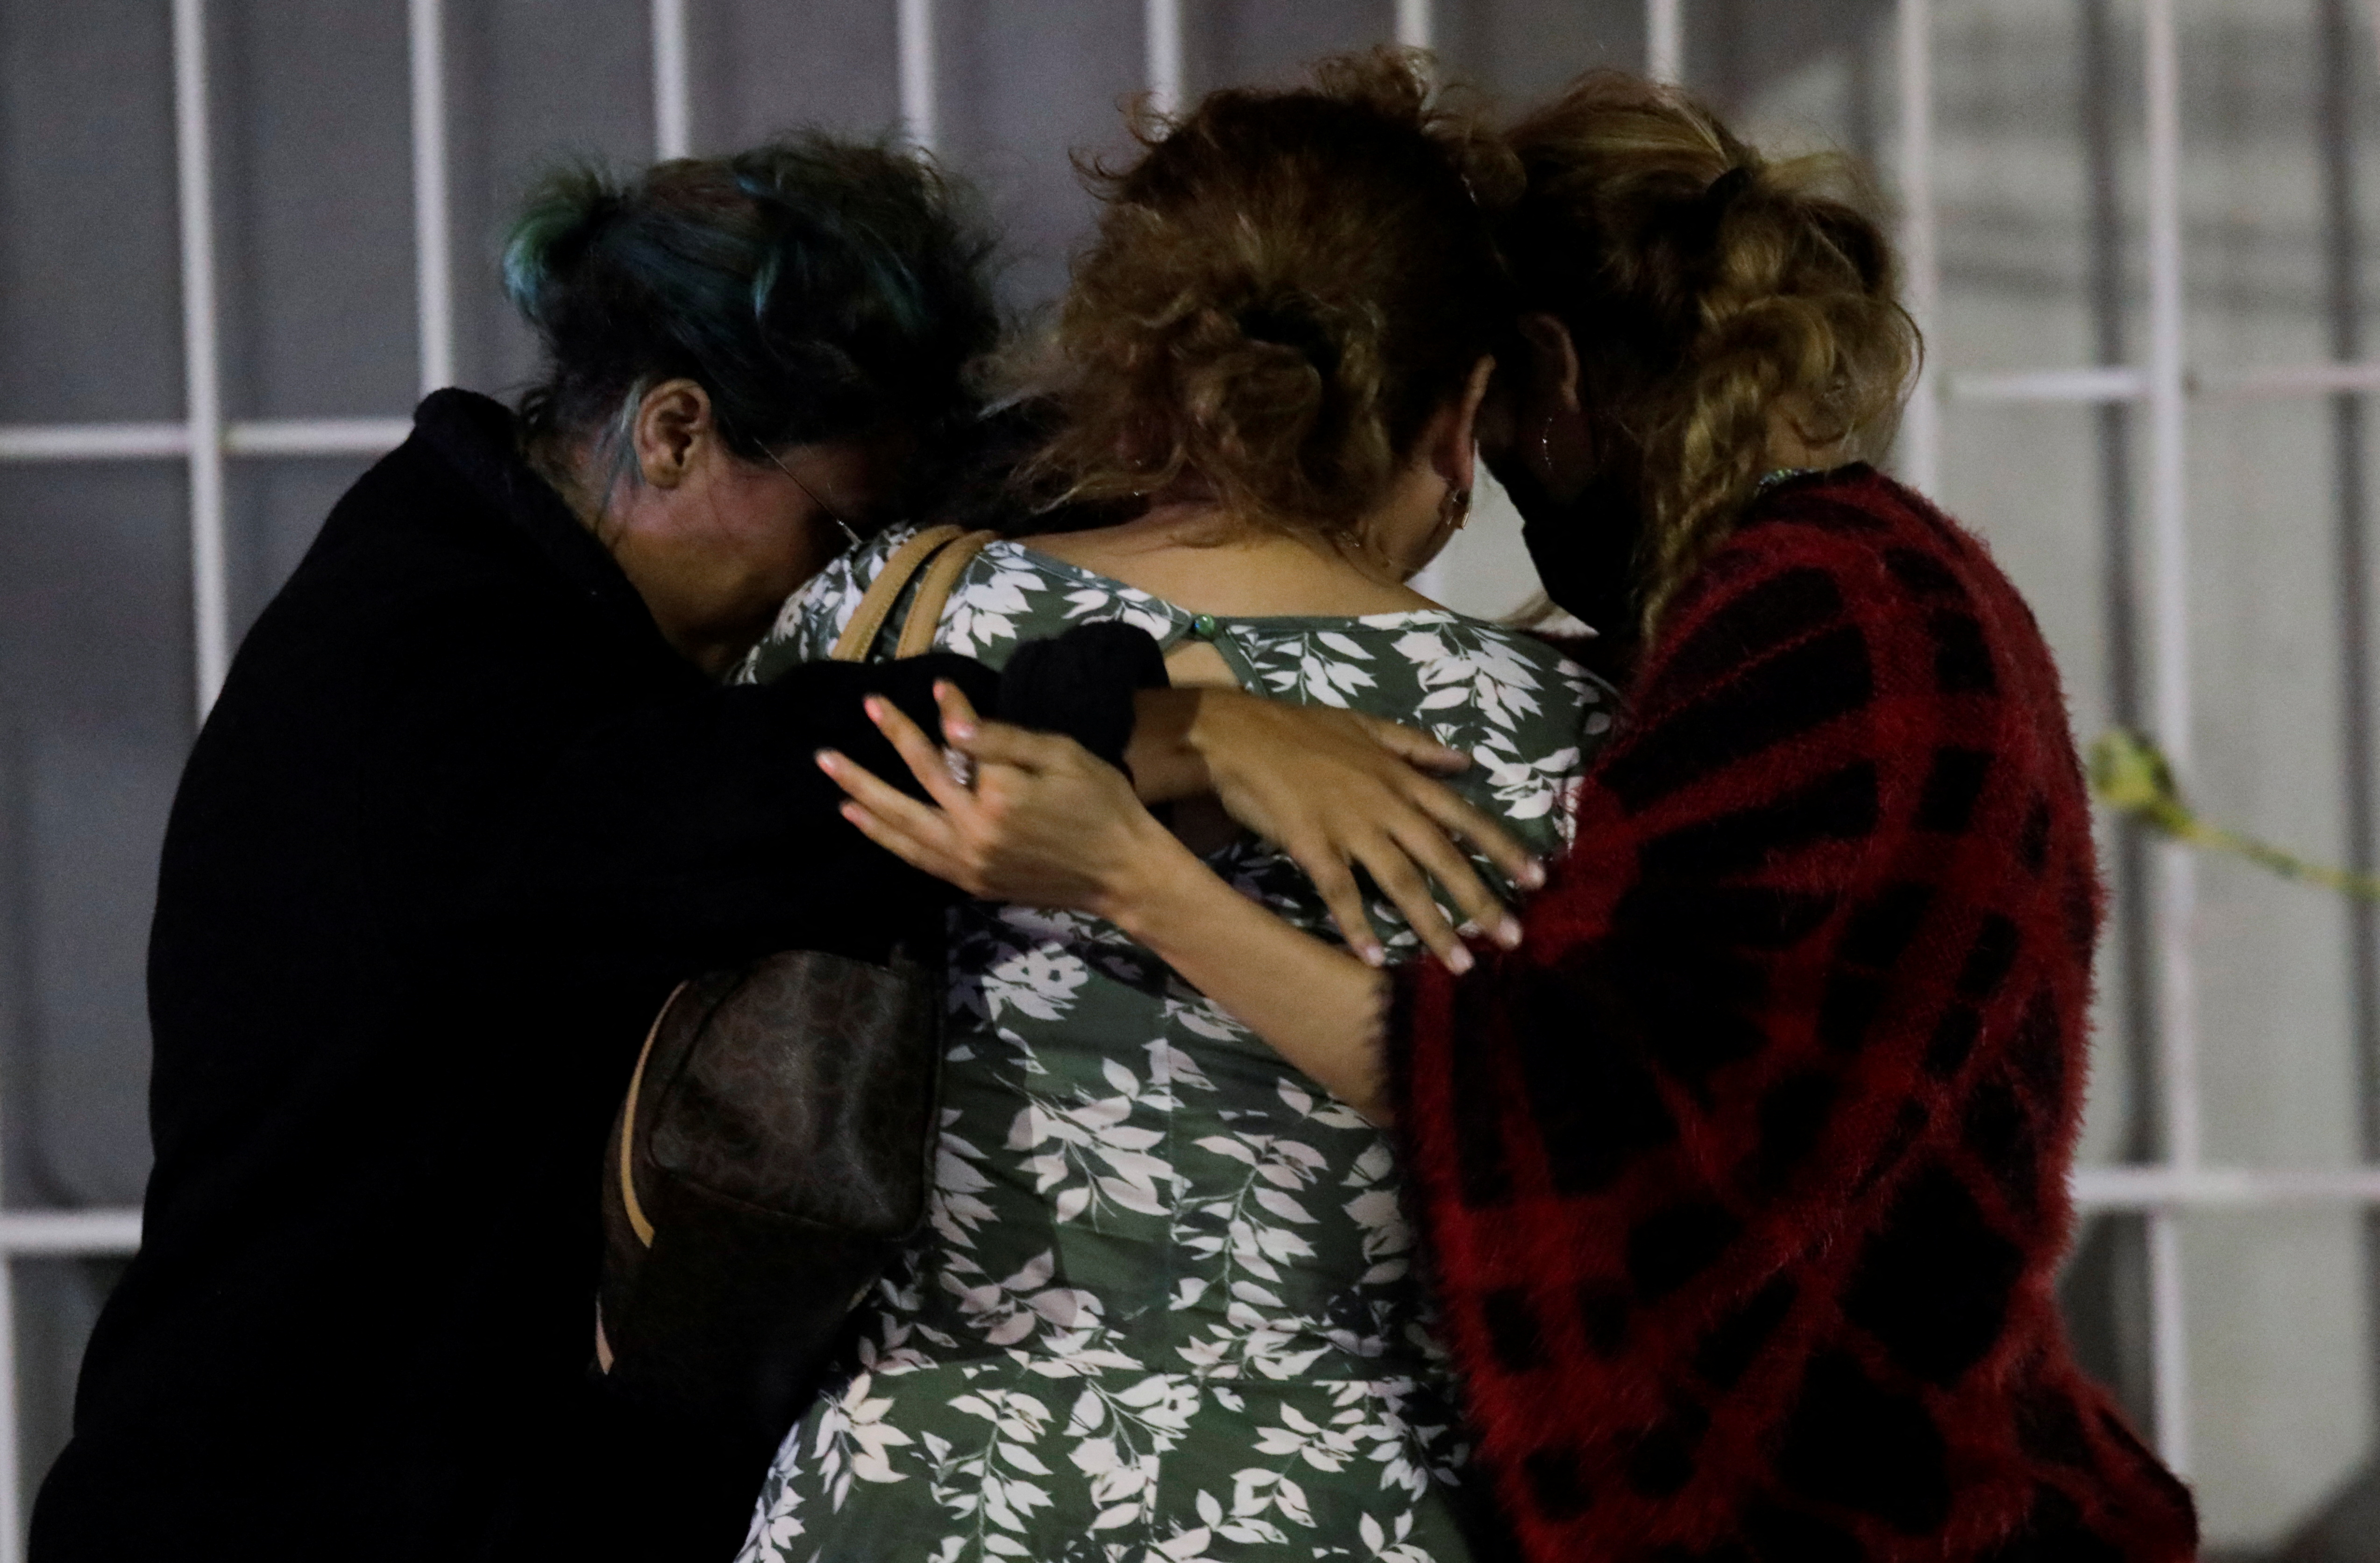 Dolores Bazaldua, mother of 18-year old missing student Debanhi Escobar, is embraced by her family and friends outside the Nueva Castilla motel after authorities found the body of a woman in a water tank, which she says belongs to her daughter, in Escobed